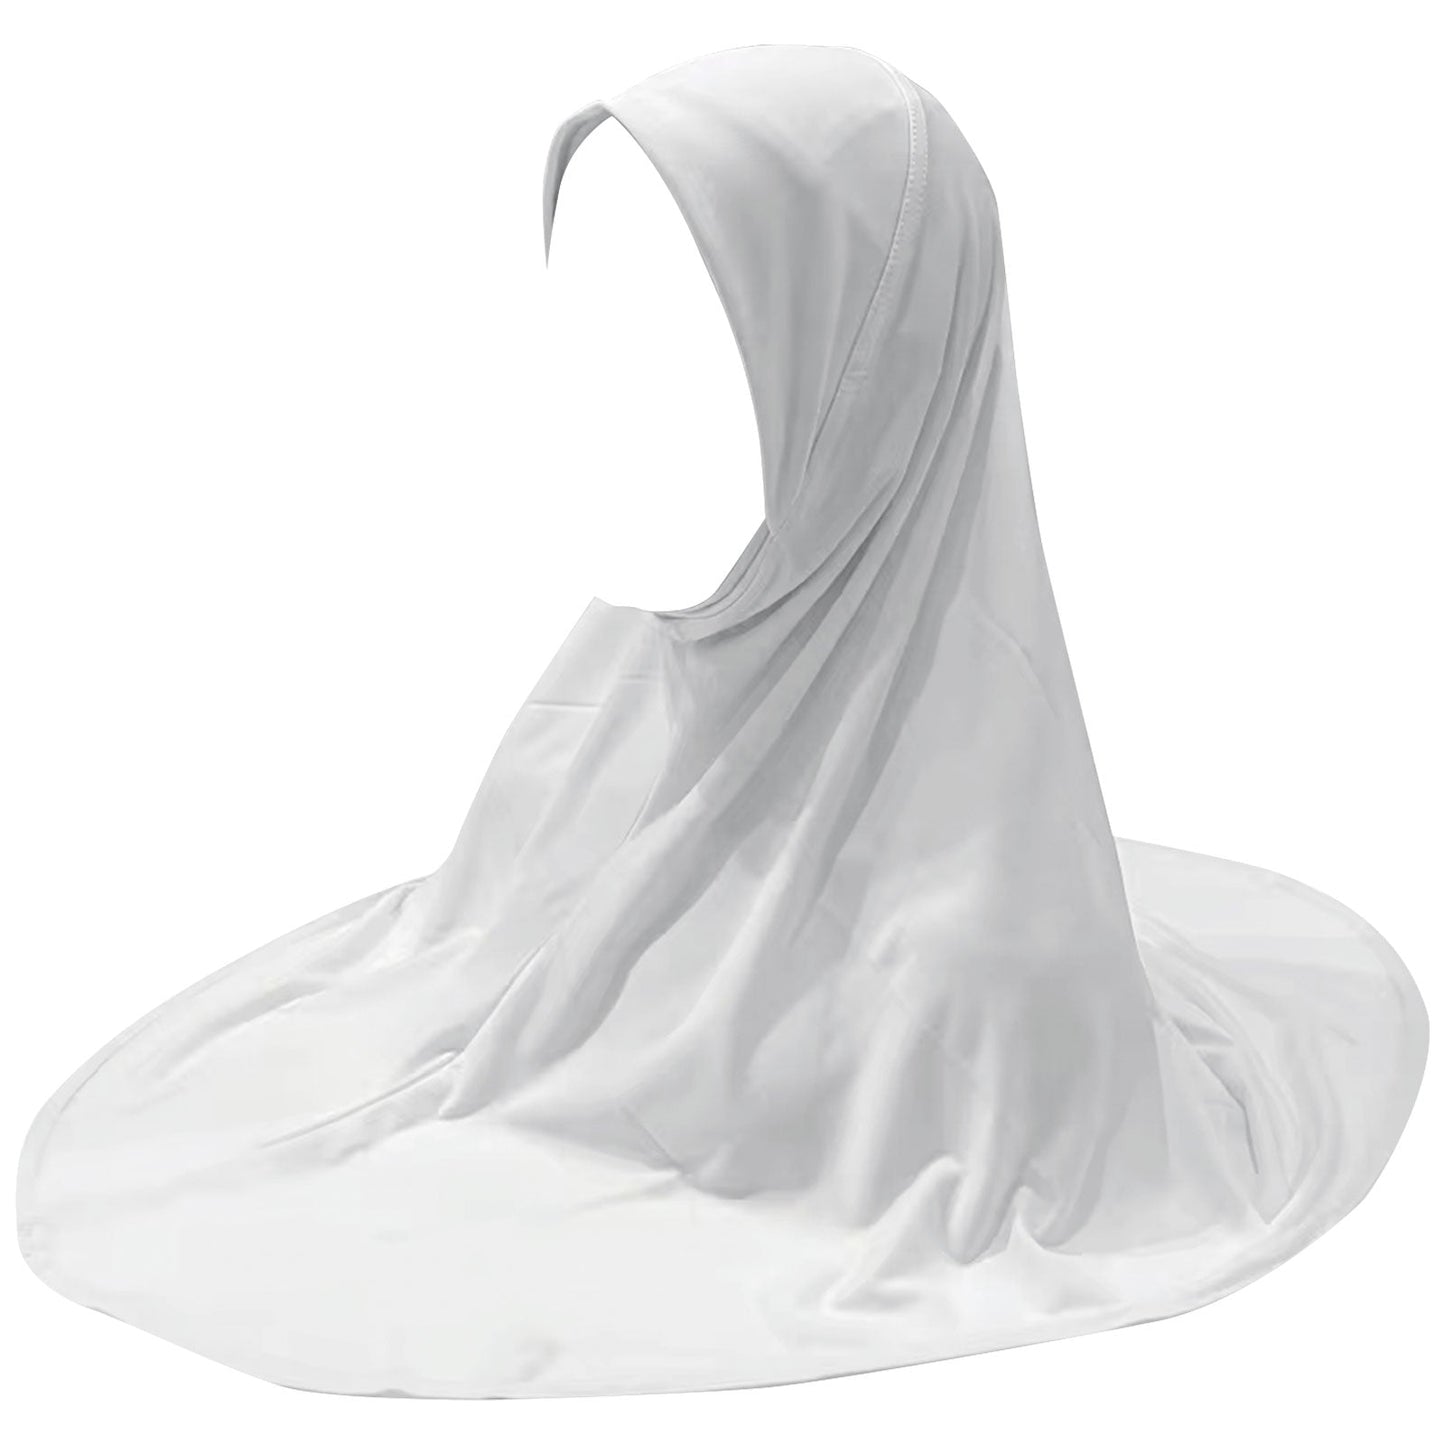 made-of-lightweight-comfortable-linen-white-instant-hijab